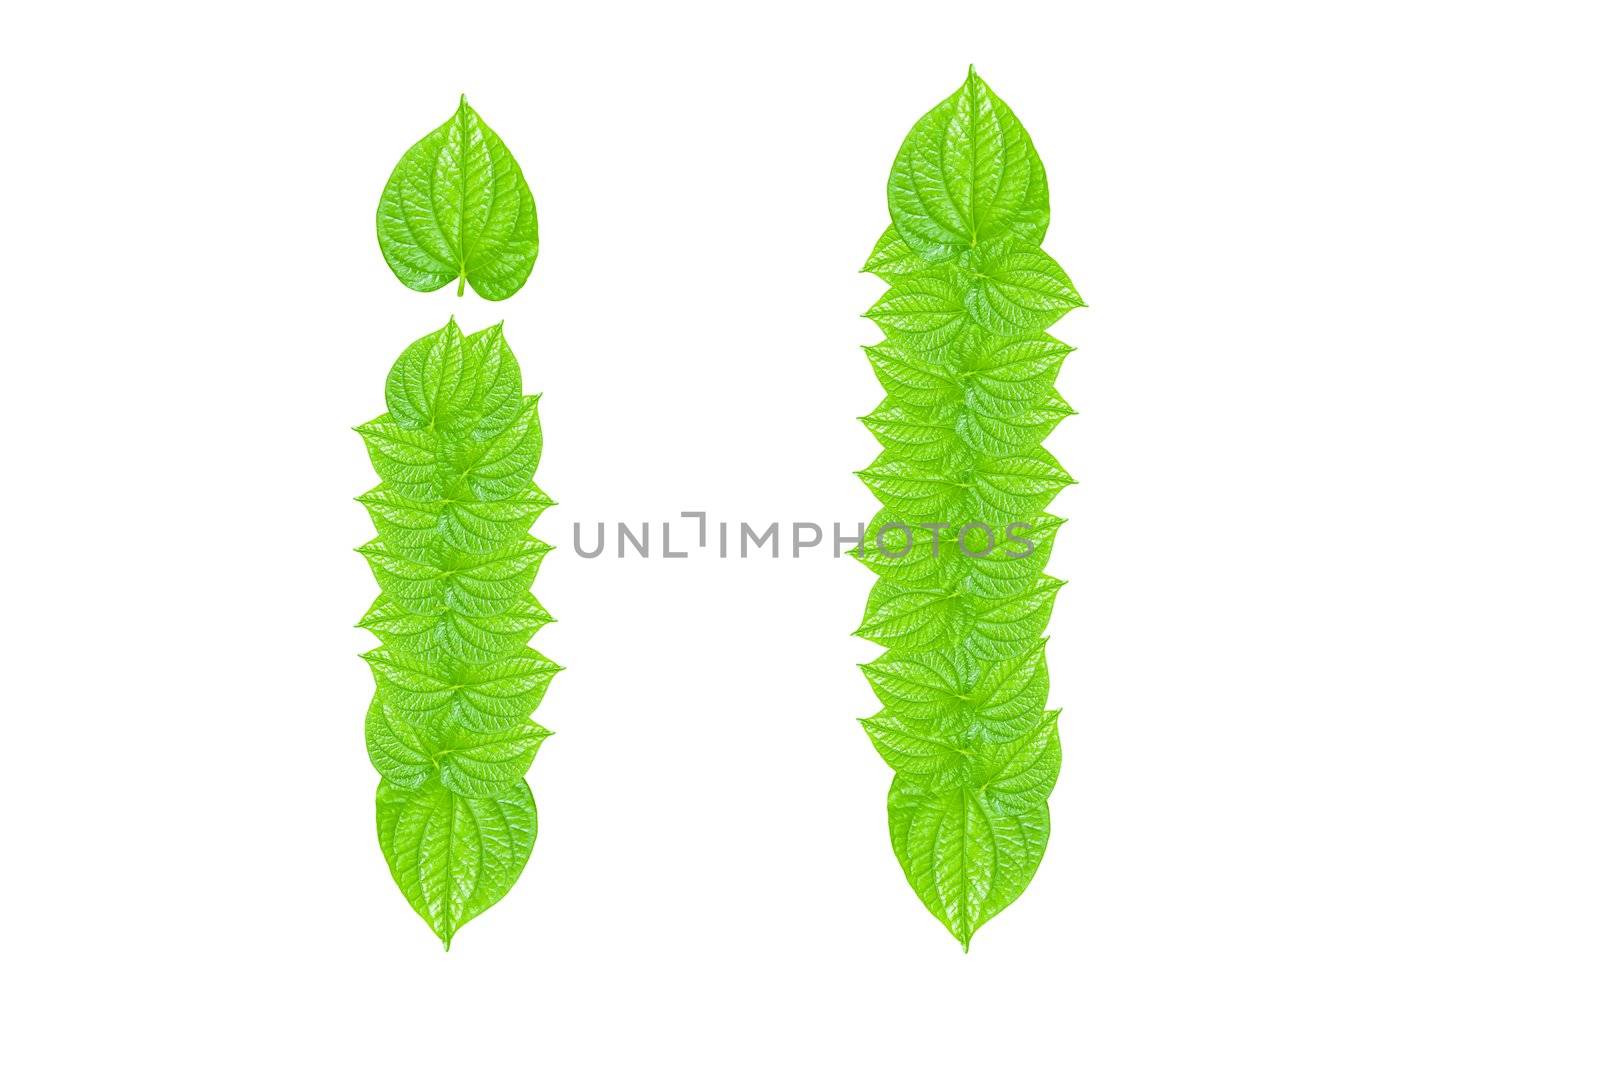 English alphabet made from green leafs with letter I in small capital and large capital letter